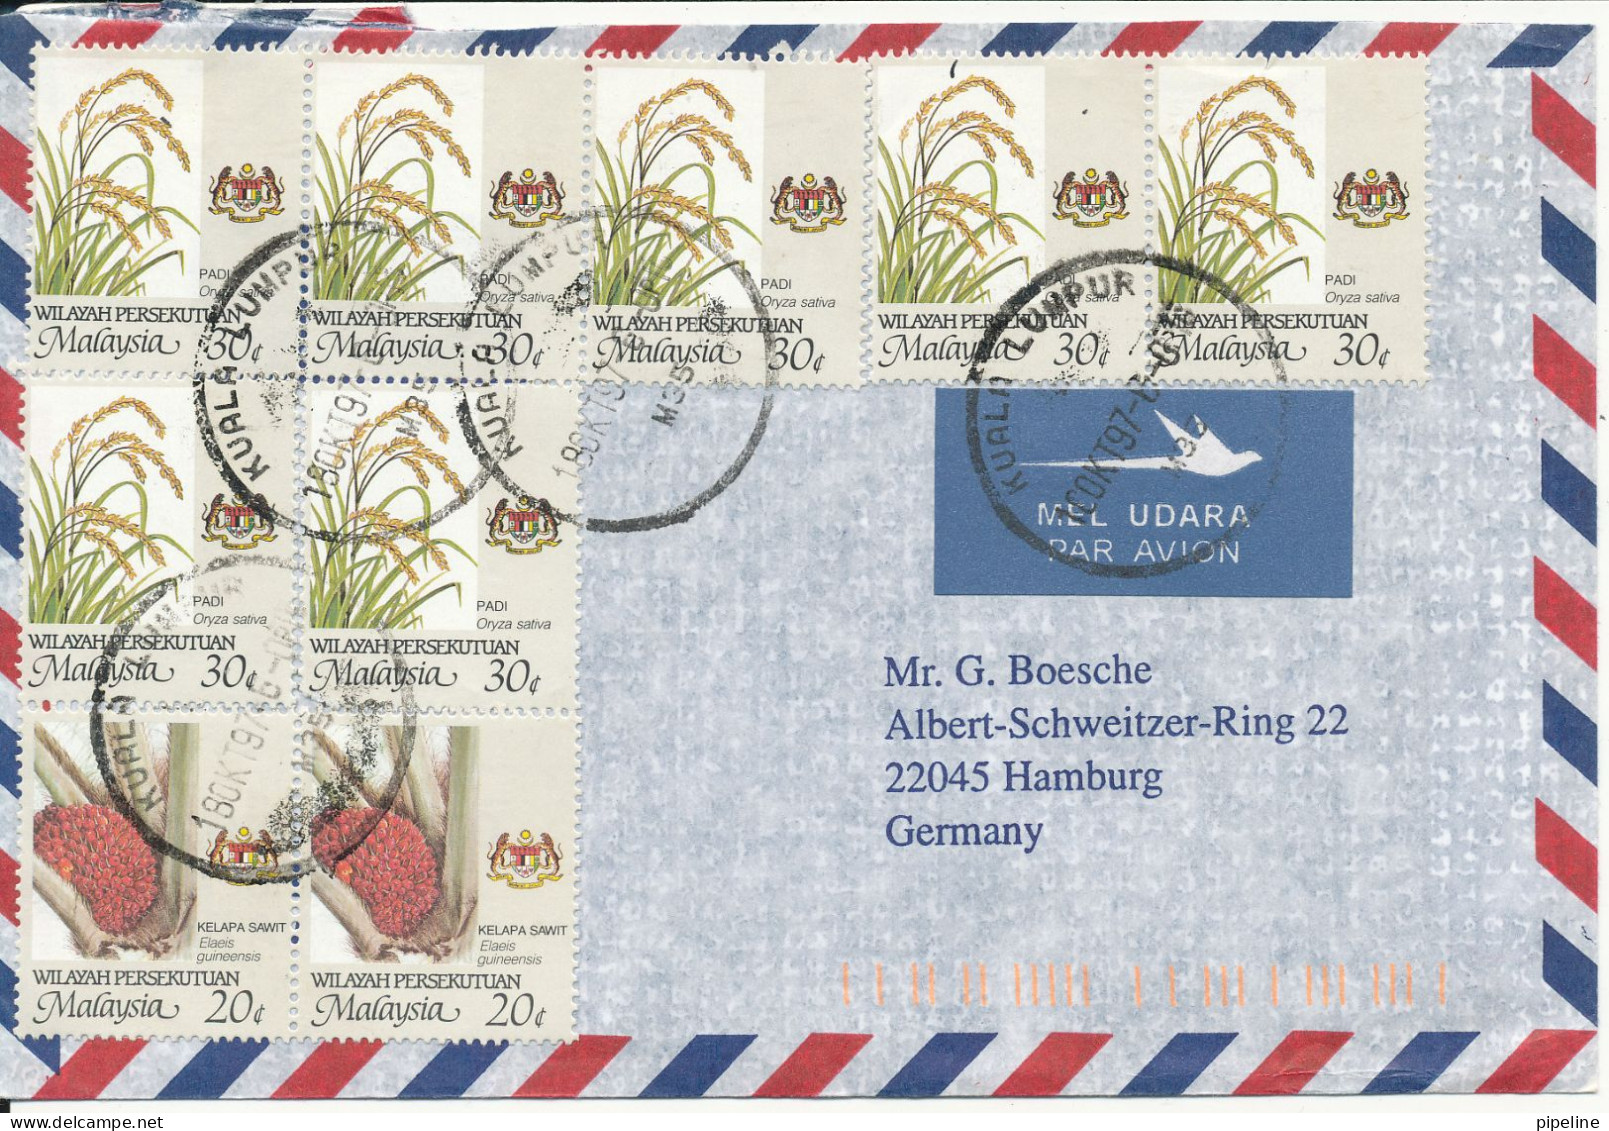 Malaysia Wilayah Persekutuan Air Mail Cover Sent To Germany 18-10-1997 - Malasia (1964-...)